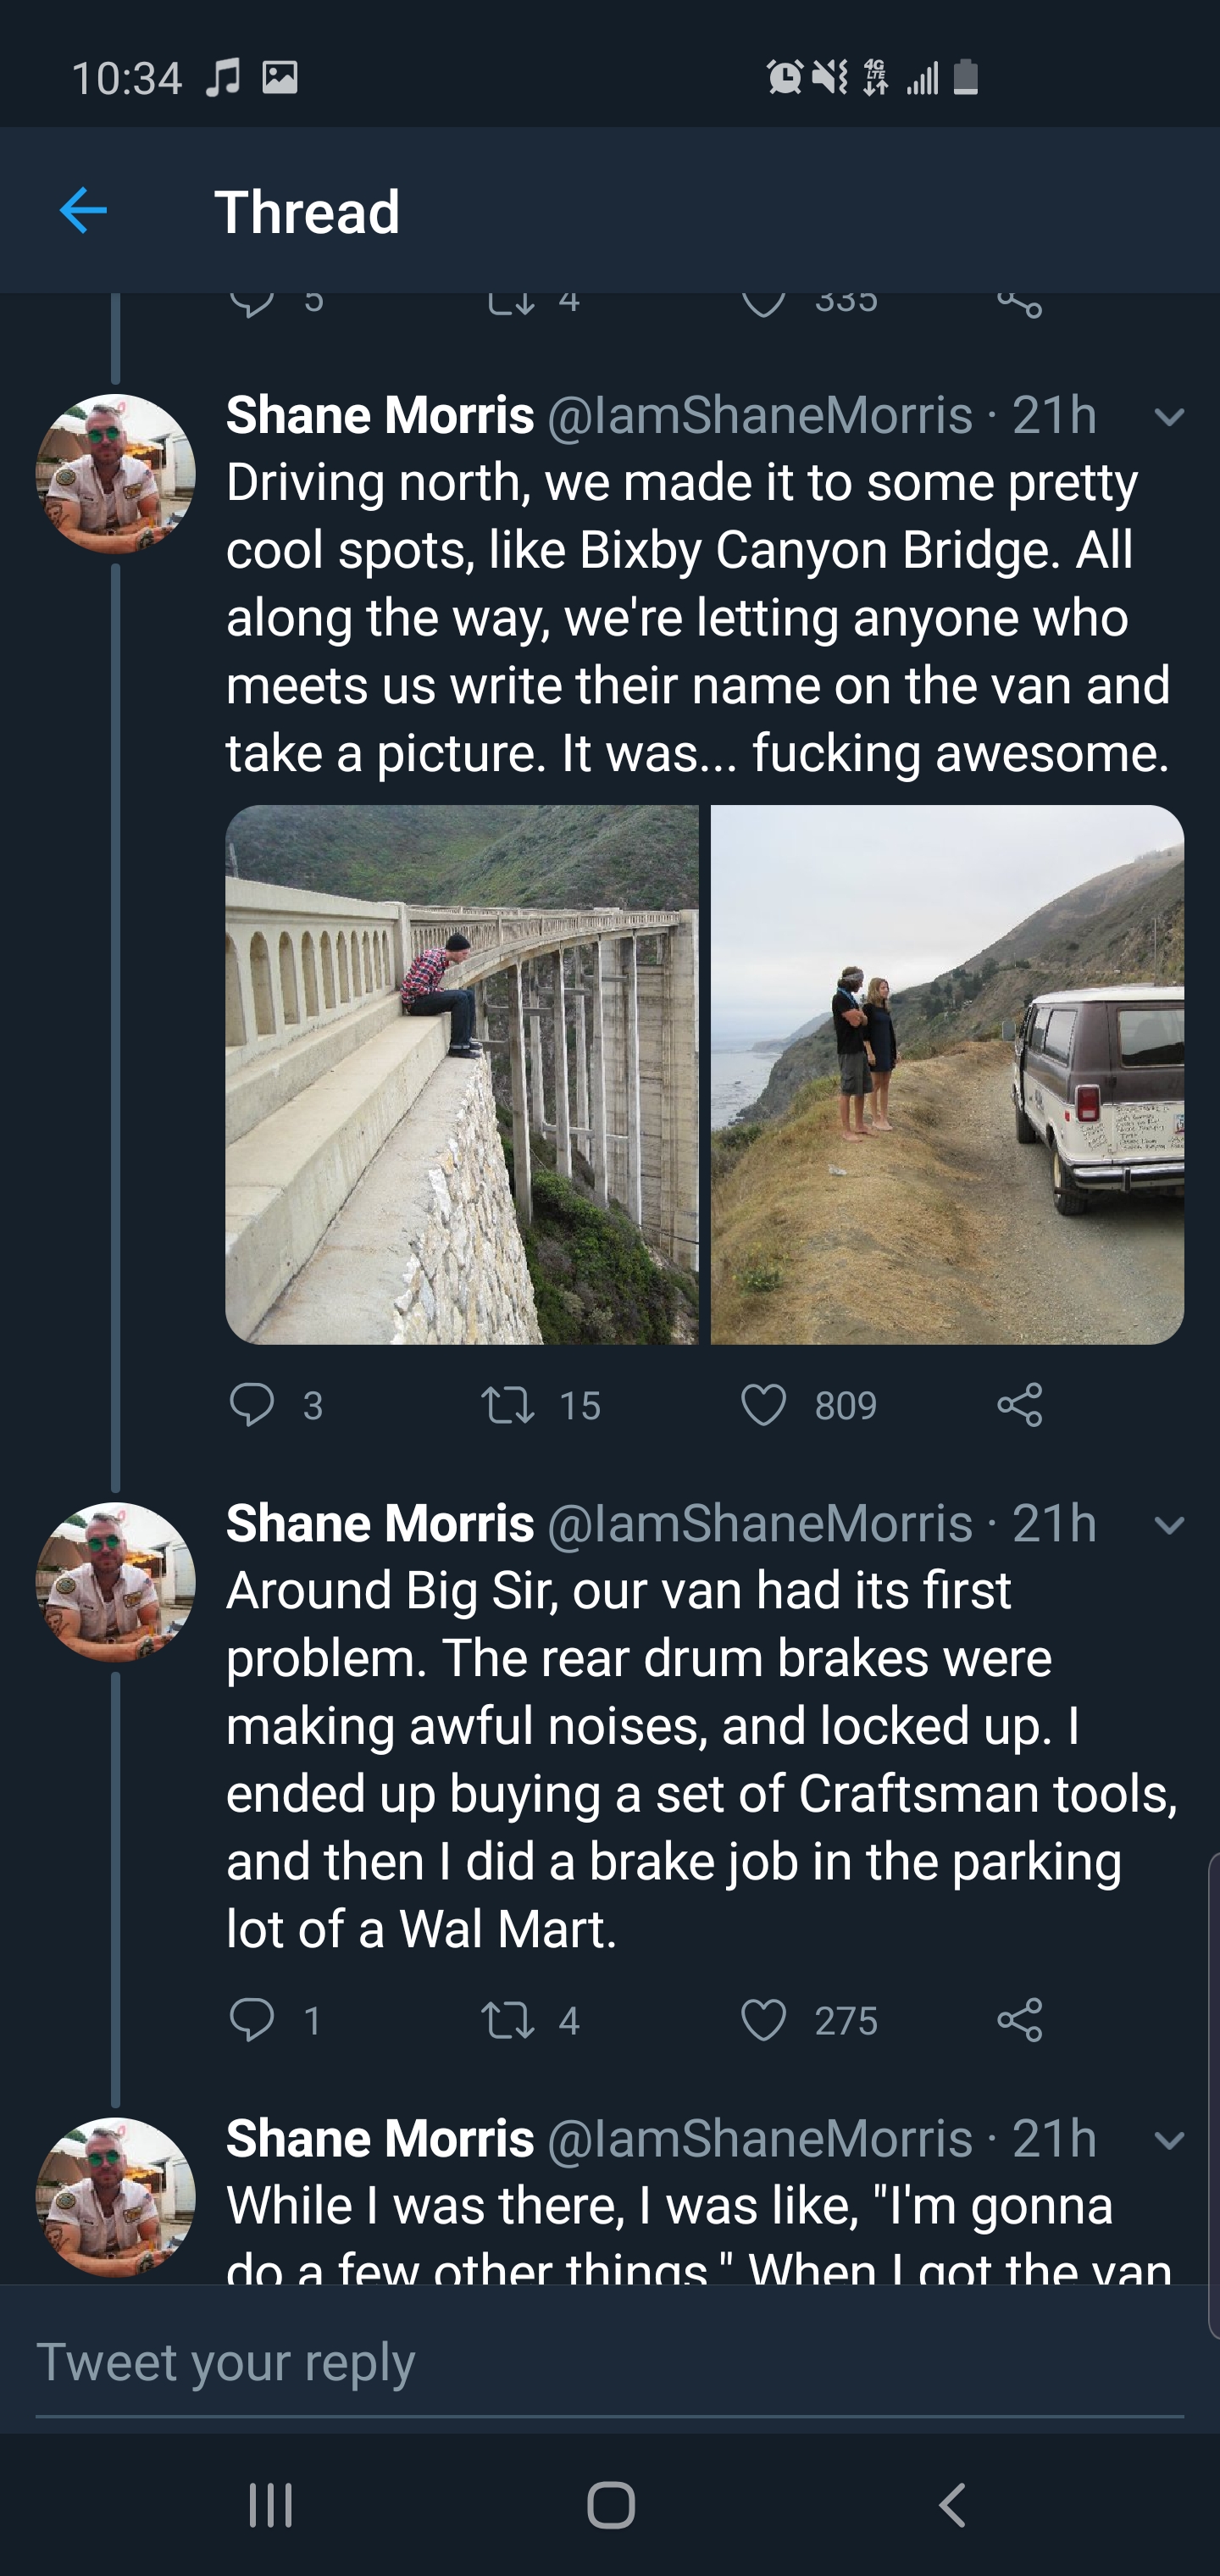 screenshot - Je Aaa Thread 33 Shane Morris 21h Driving north, we made it to some pretty cool spots, Bixby Canyon Bridge. All along the way, we're letting anyone who meets us write their name on the van and take a picture. It was... fucking awesome. O 3 11